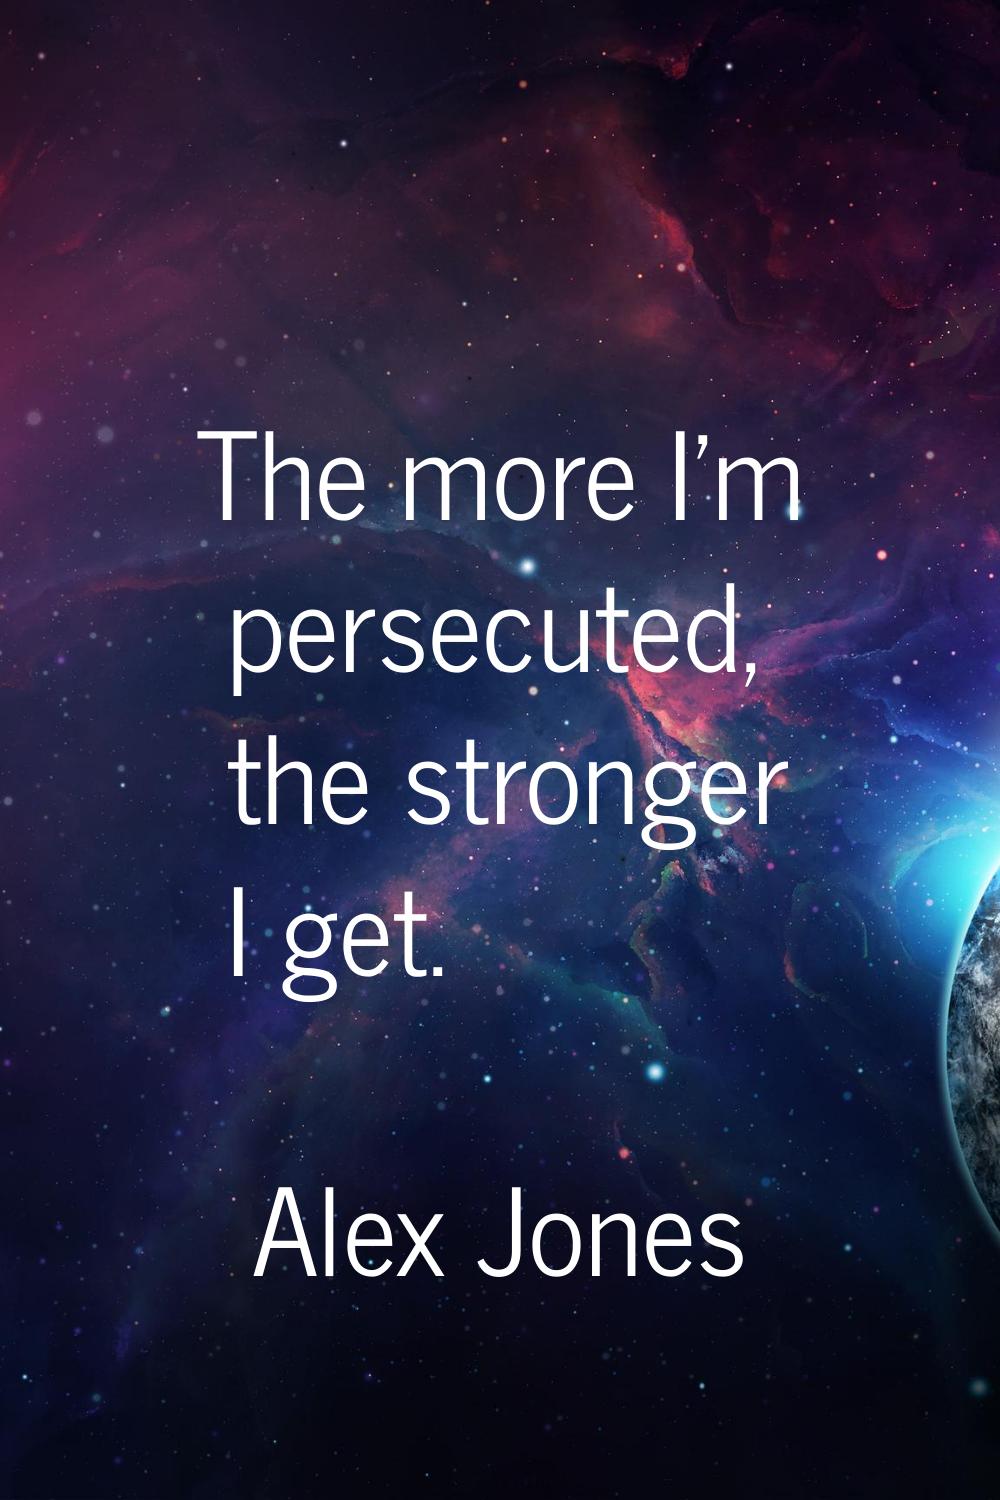 The more I'm persecuted, the stronger I get.